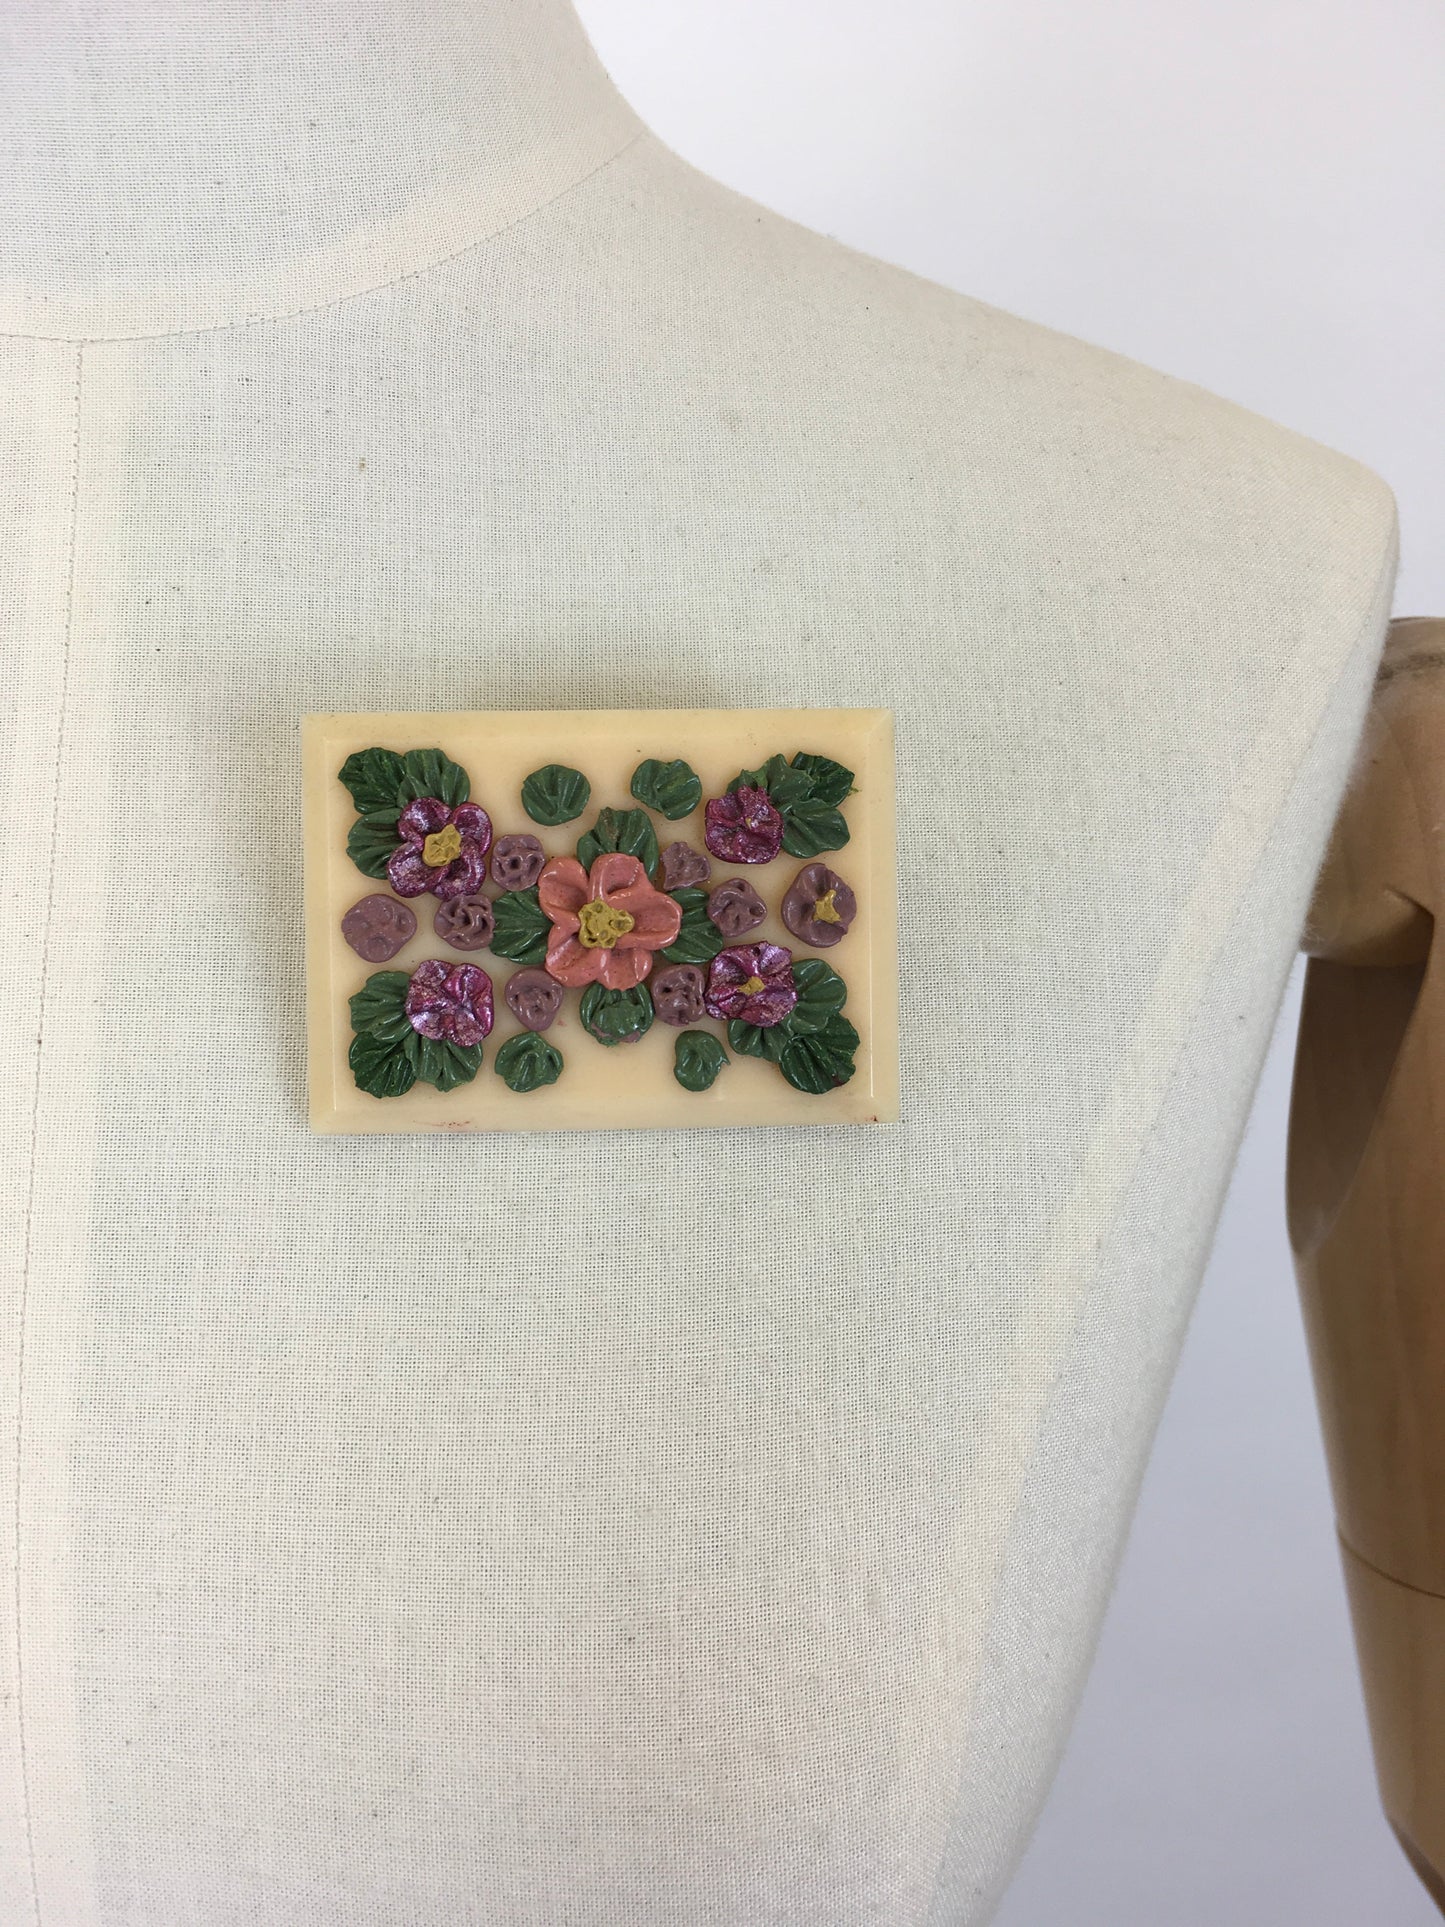 Original 1940’s Beautiful Soft Pink Lucite Brooch - With Hand-painted Flowers in Pinks, Violets and Green